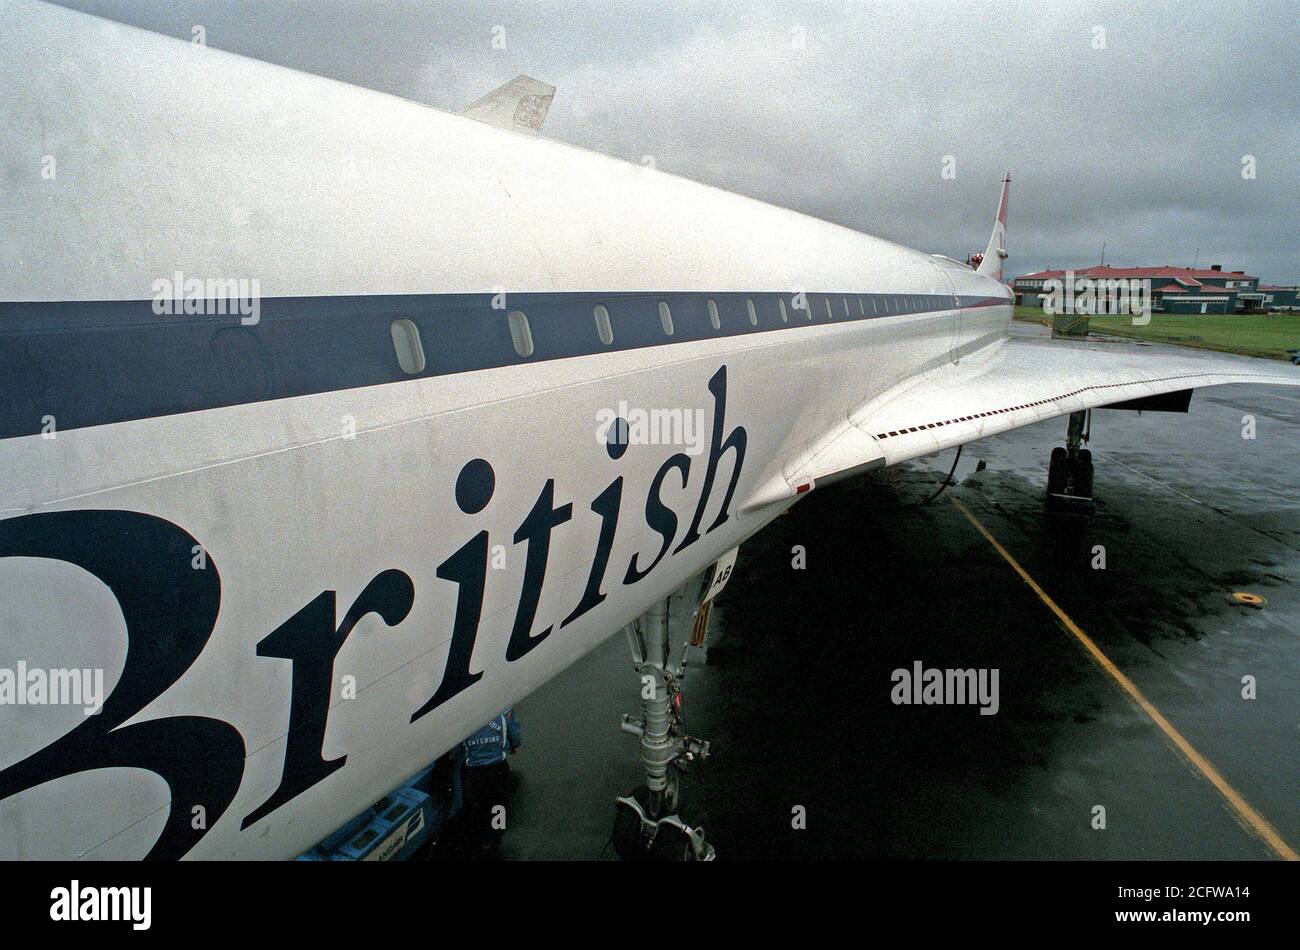 1977 - A view from the top of the boarding ladder of the left side, wing and tail section of a British Airways Concorde aircraft parked on the flight line.  The aircraft is on an around-the-world test flight. Stock Photo